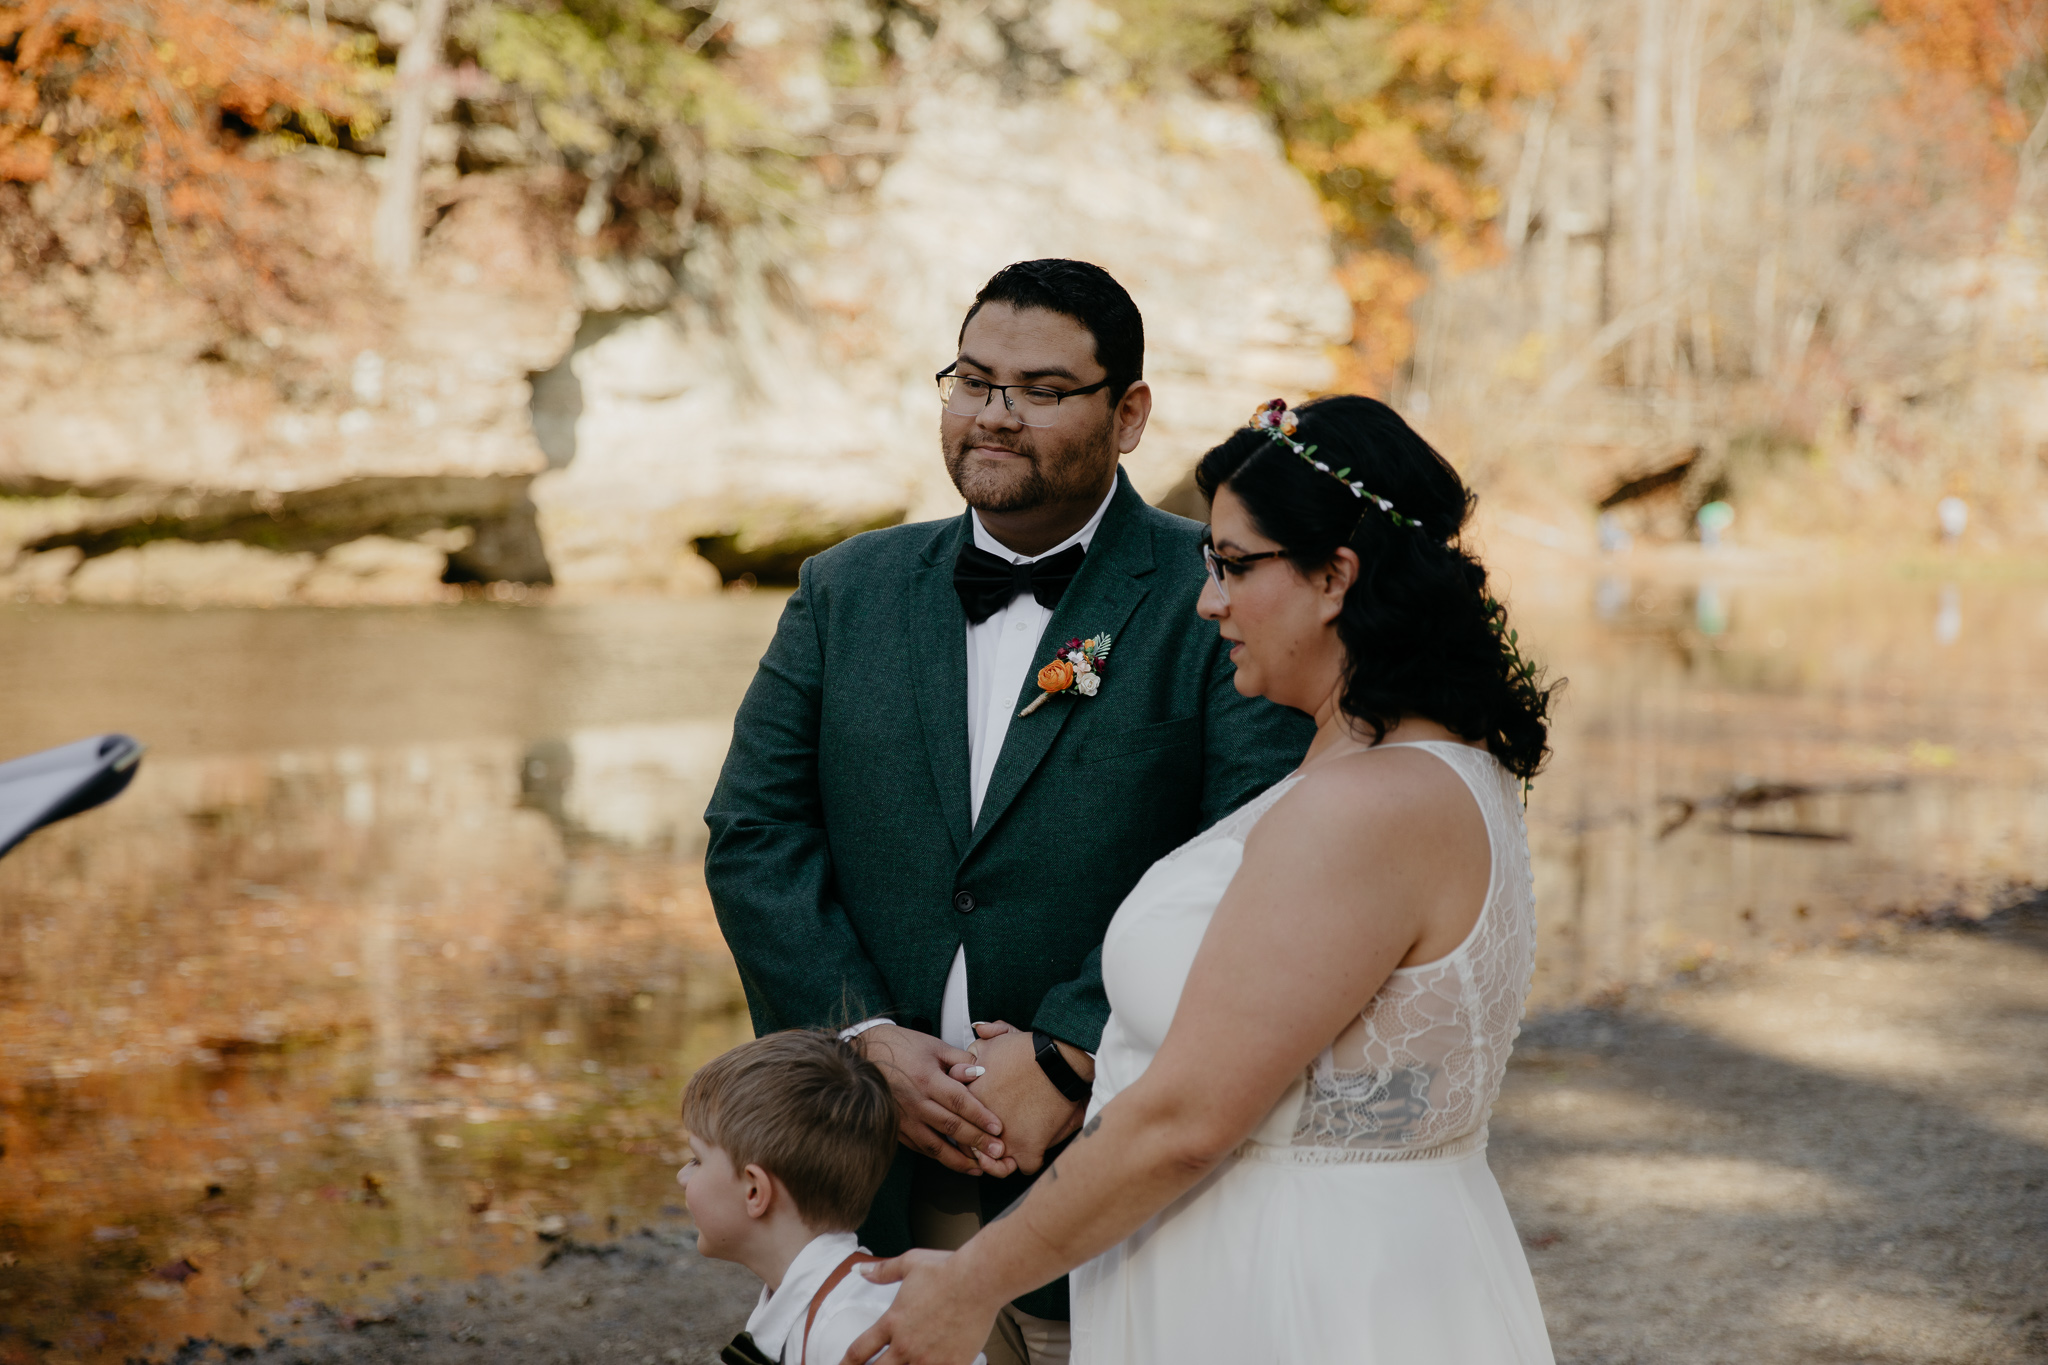 A couple eloping at Turkey Run State Park, shares vows overlooking Sugar Creek